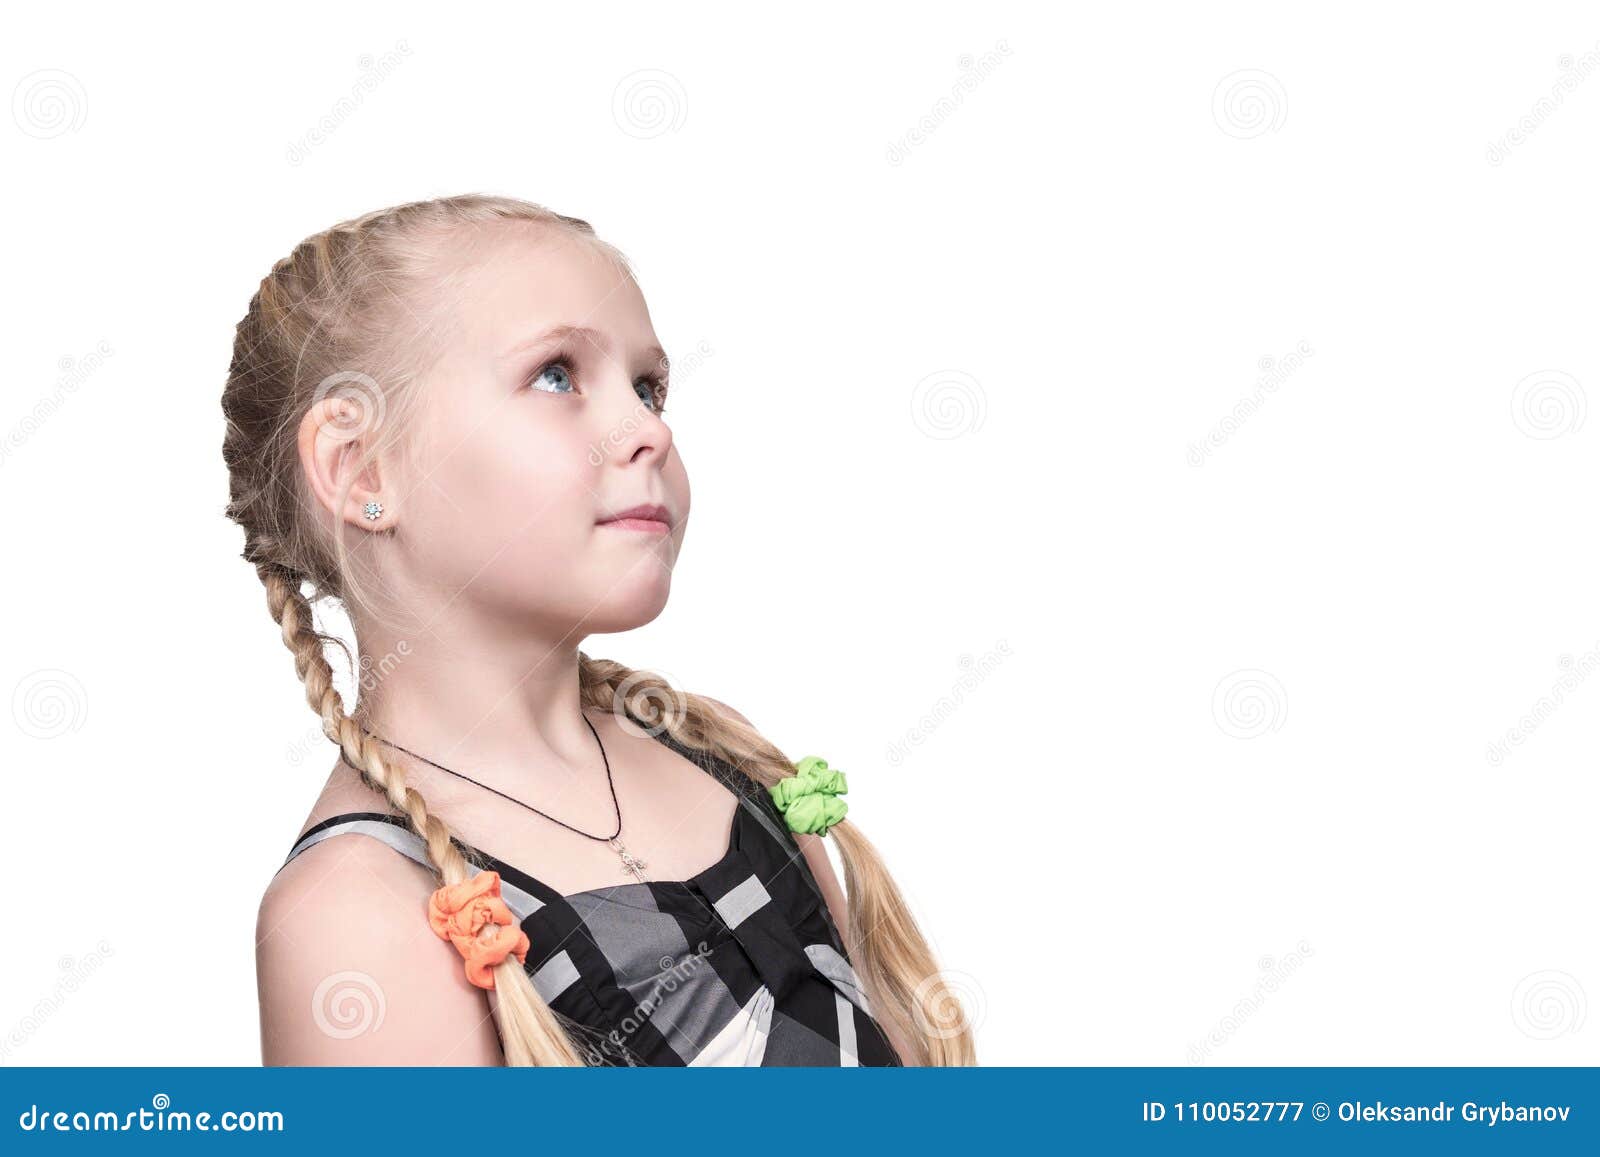 Portrait Of A Girl Looking Sideways Stock Image Image Of Female Blond 110052777